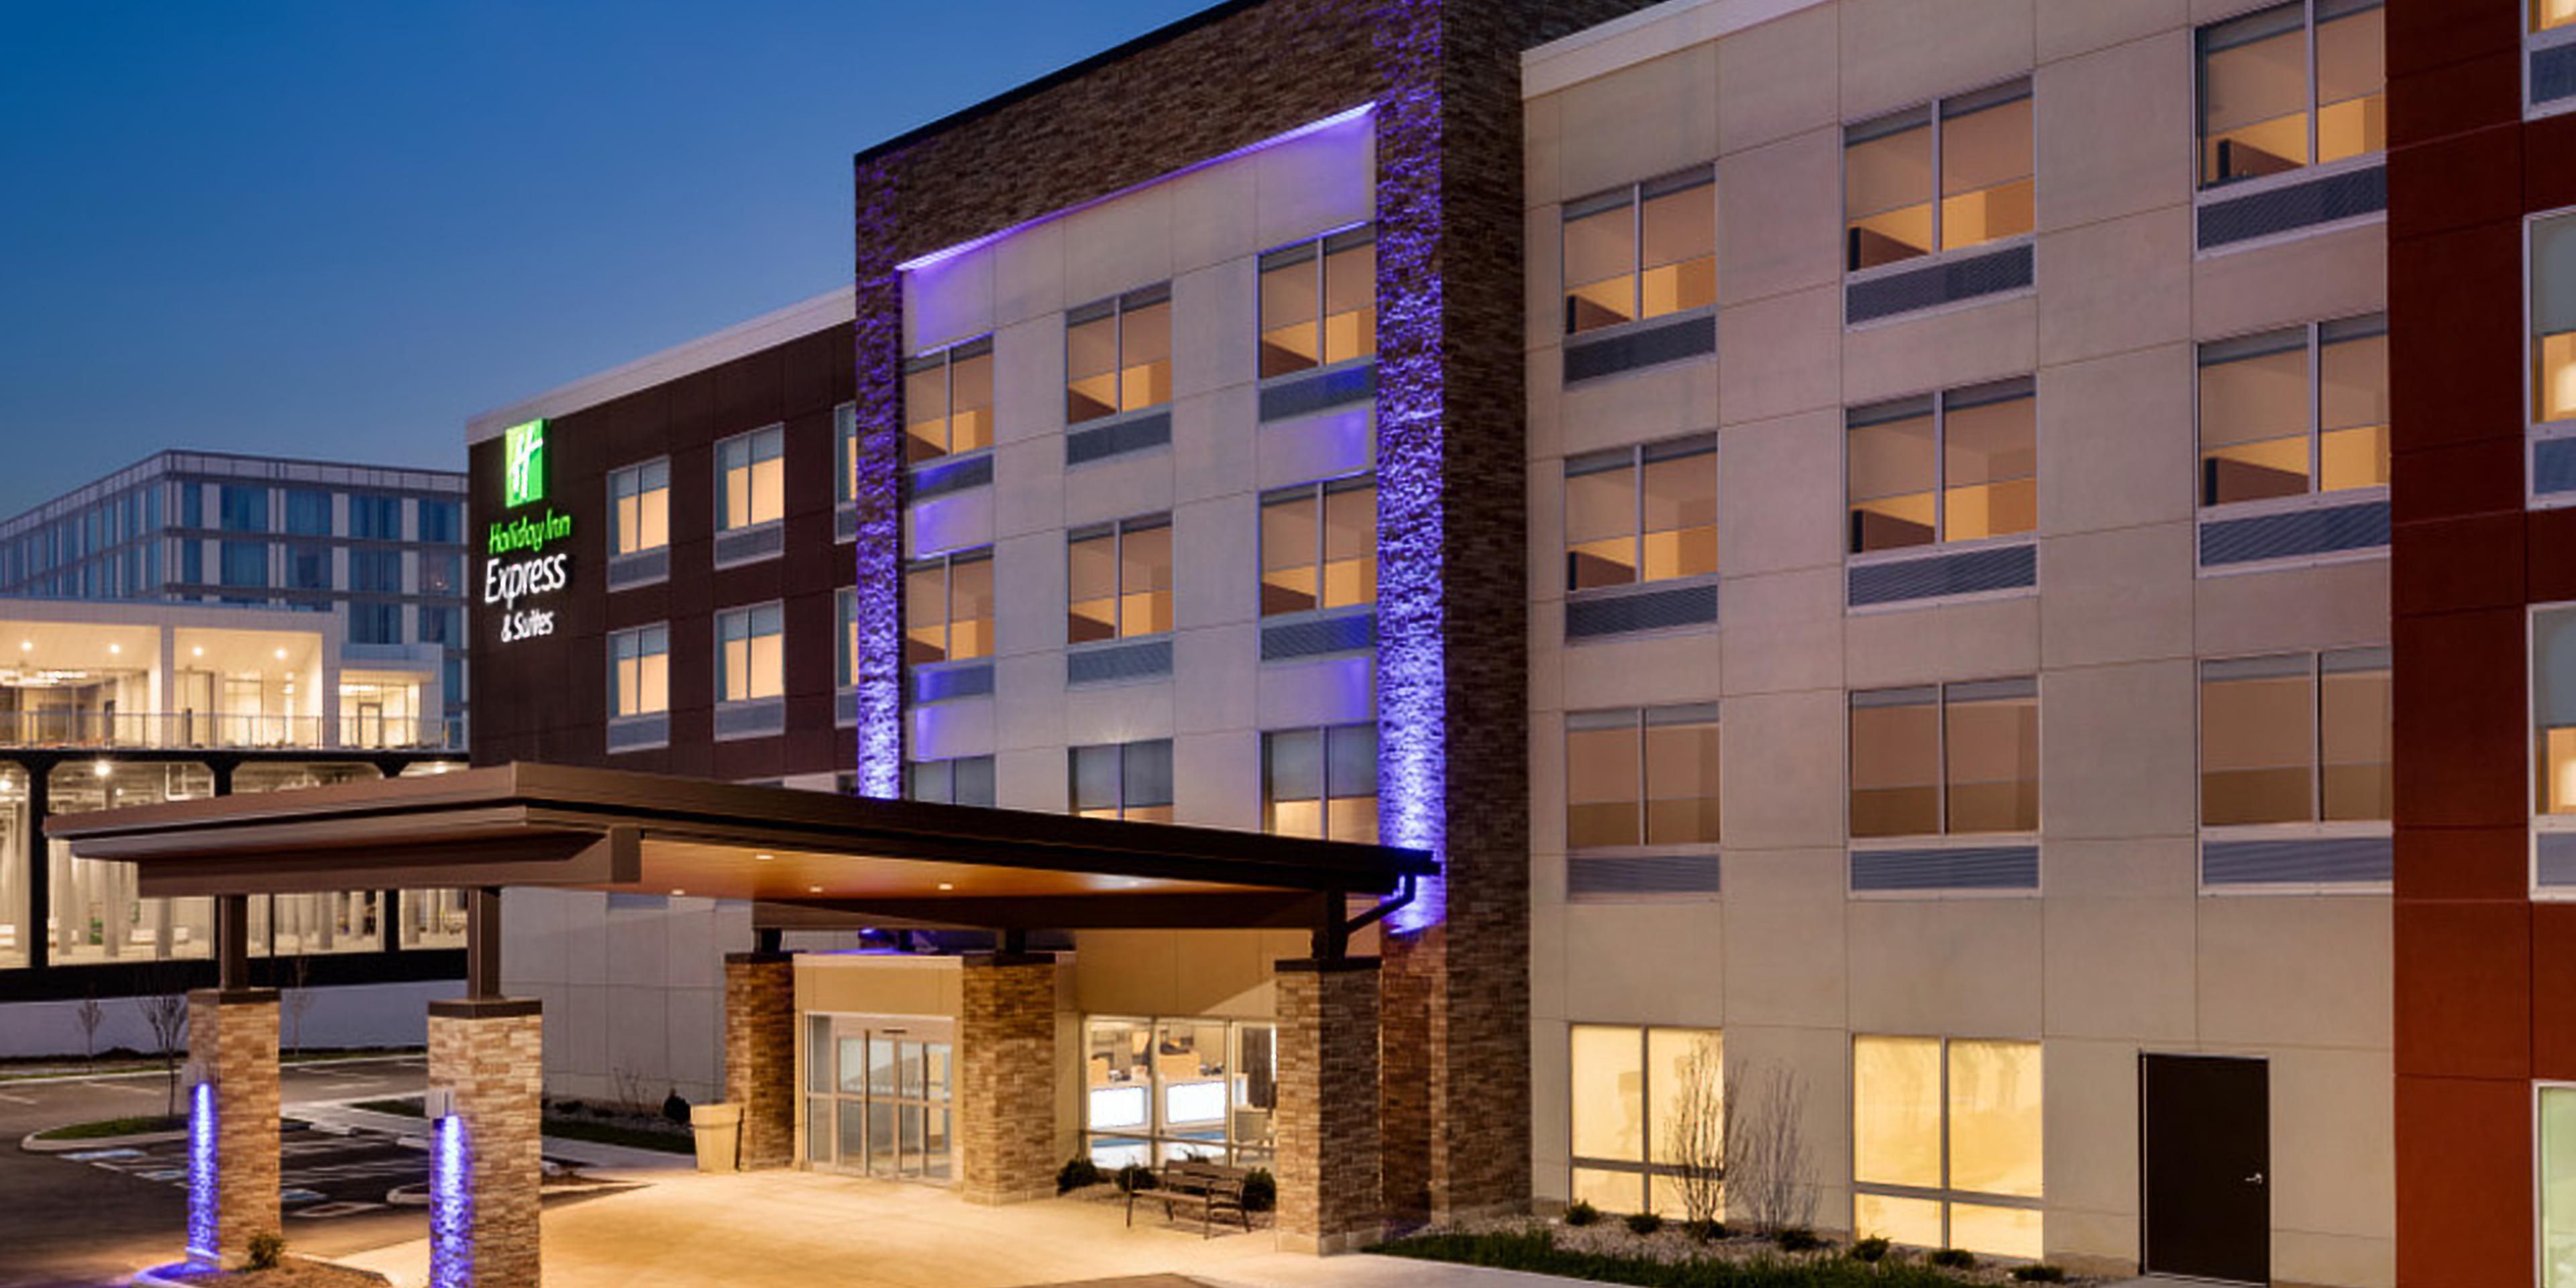 Let us show you what a great property the Holiday Inn Express & Suites Cincinnati NE Redbank Road is before you even arrive.  